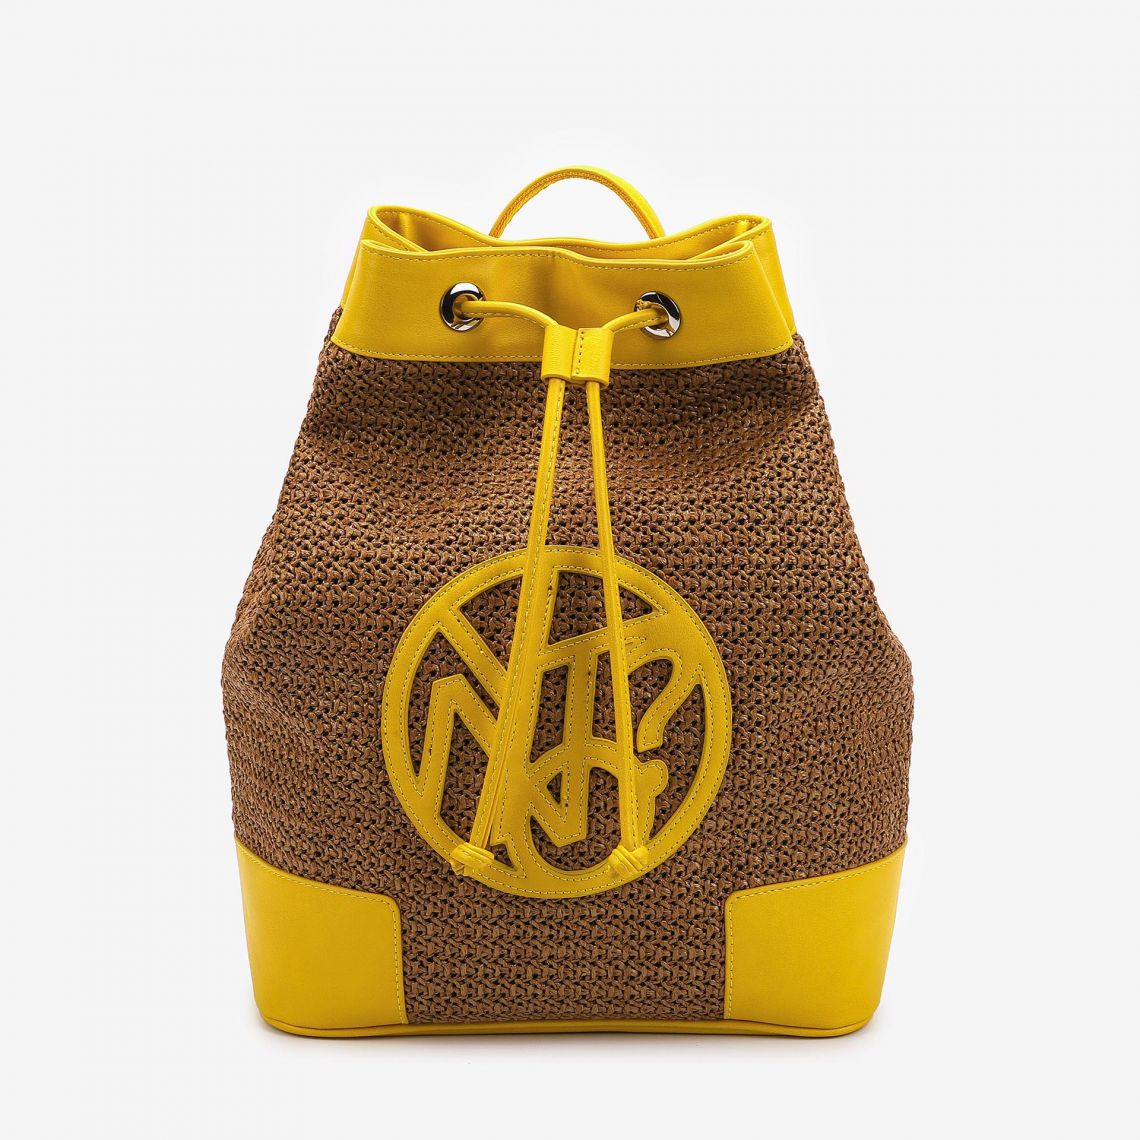 Comperare Backpack  Yellow borsa in offerta